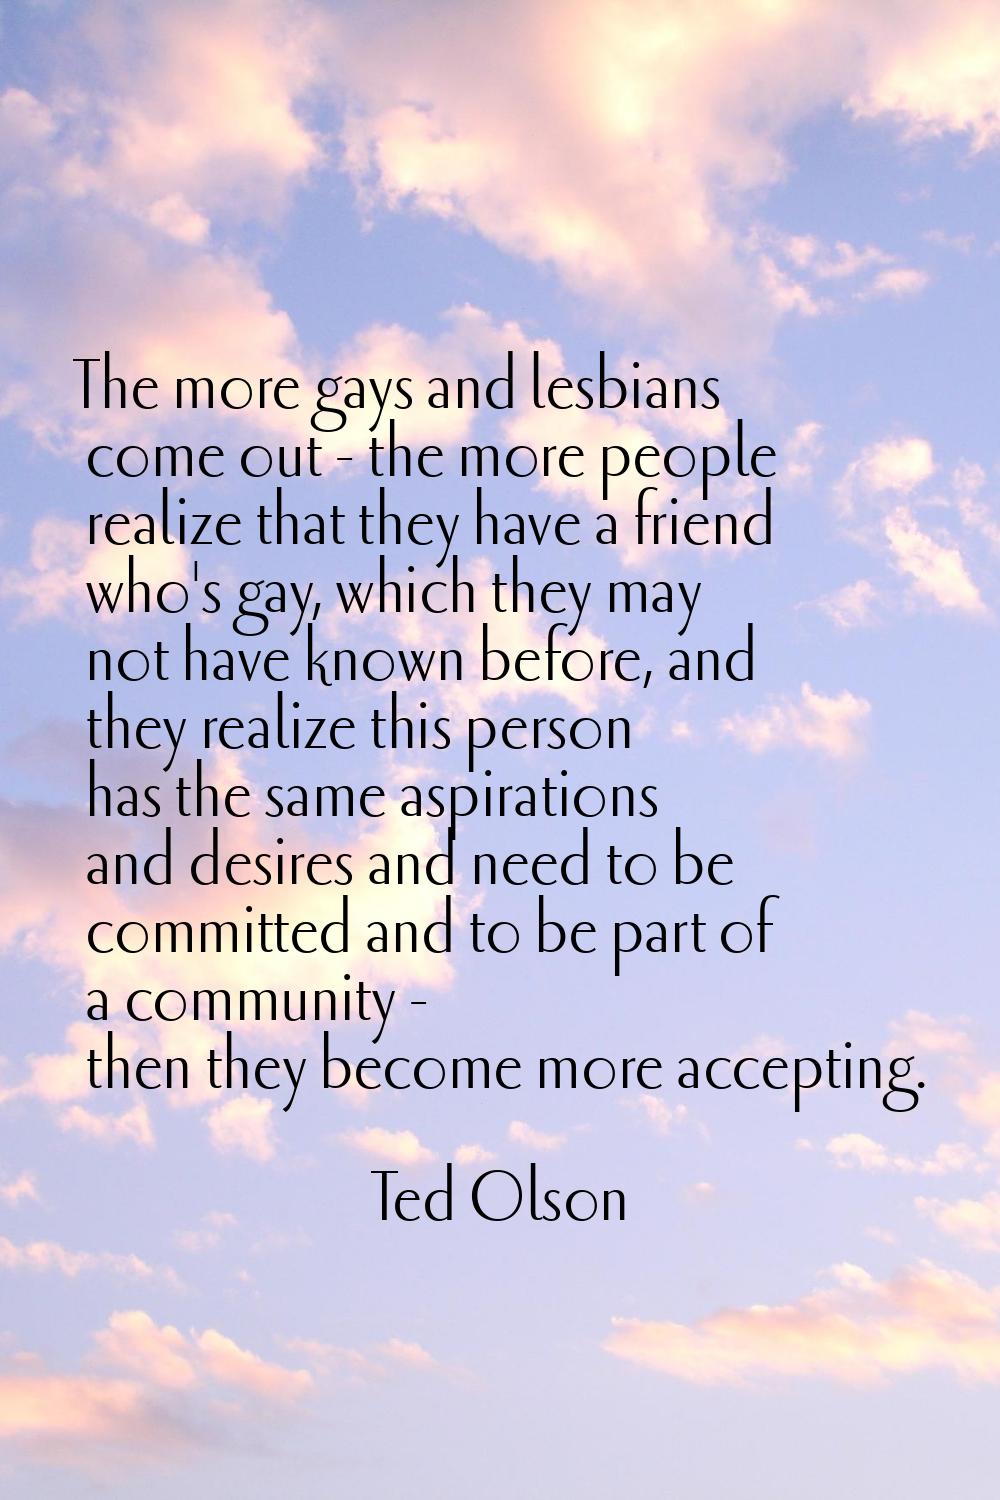 The more gays and lesbians come out - the more people realize that they have a friend who's gay, wh